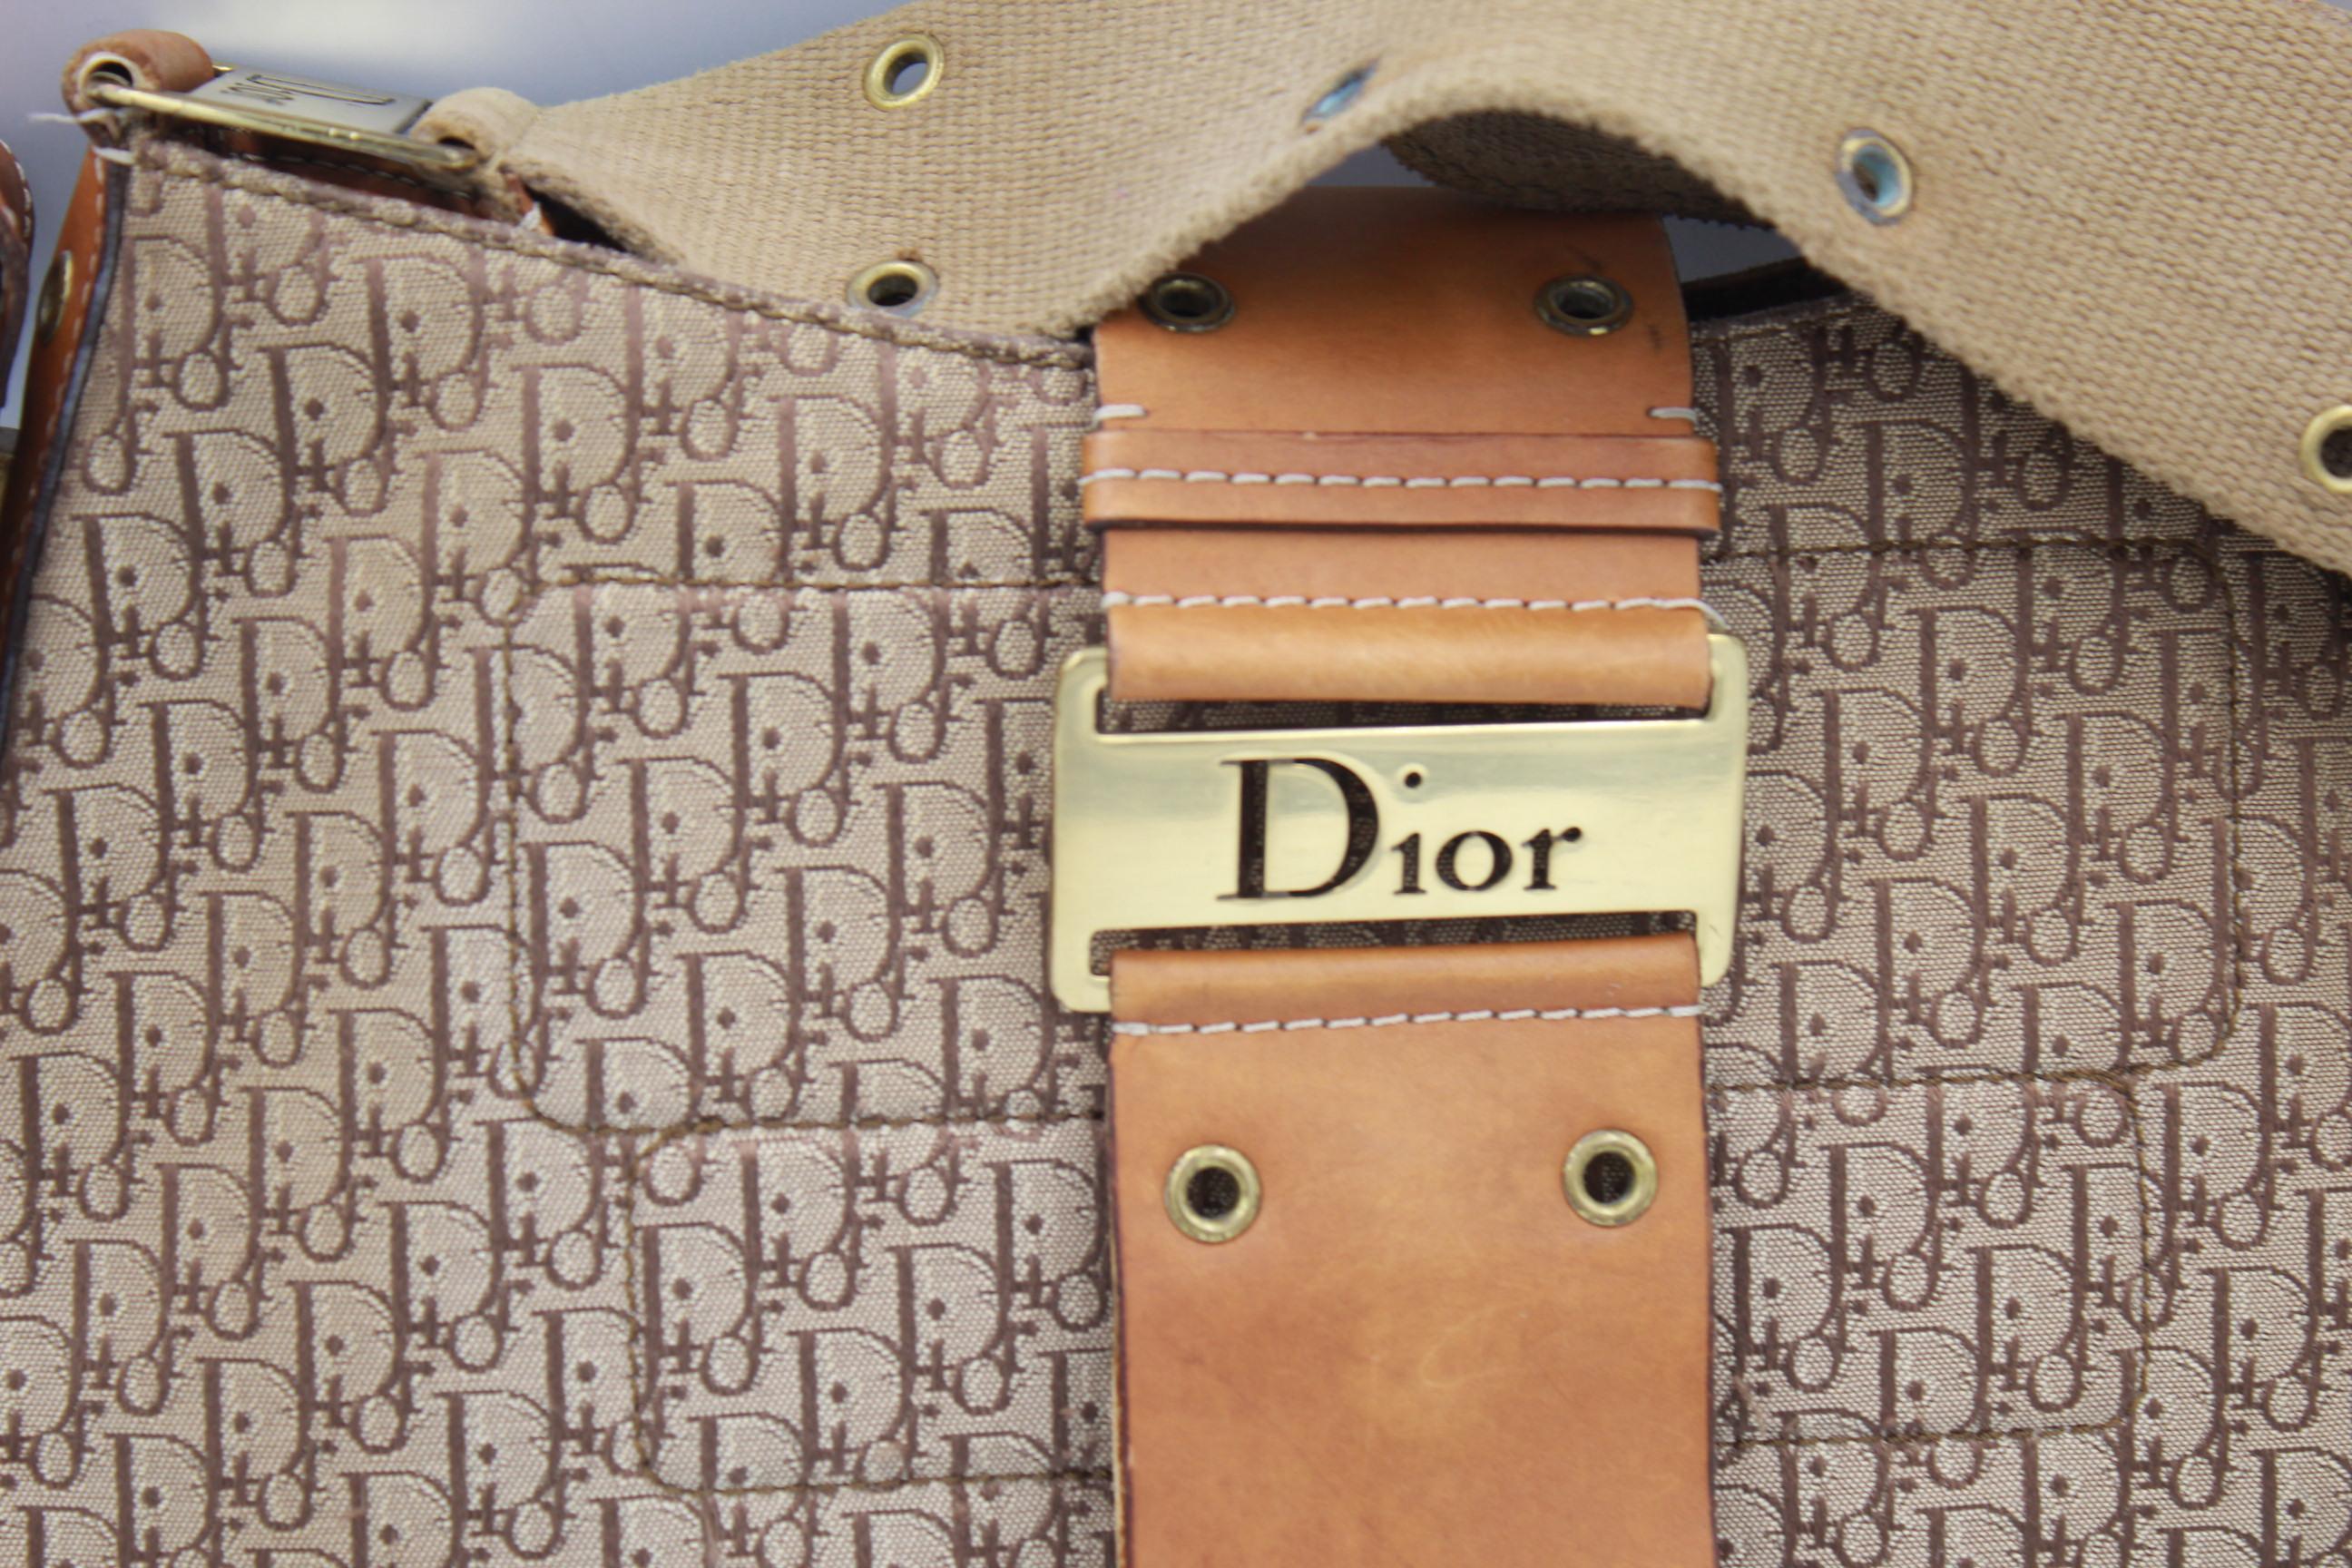 2002 Christian Dior by john Galliano monogram canvas bag in brown leather
Bag in good fait condition, it presents signs of wear in the leather but is still a beautiful piece
Some scratches in the hardware
Size 31x20 cm